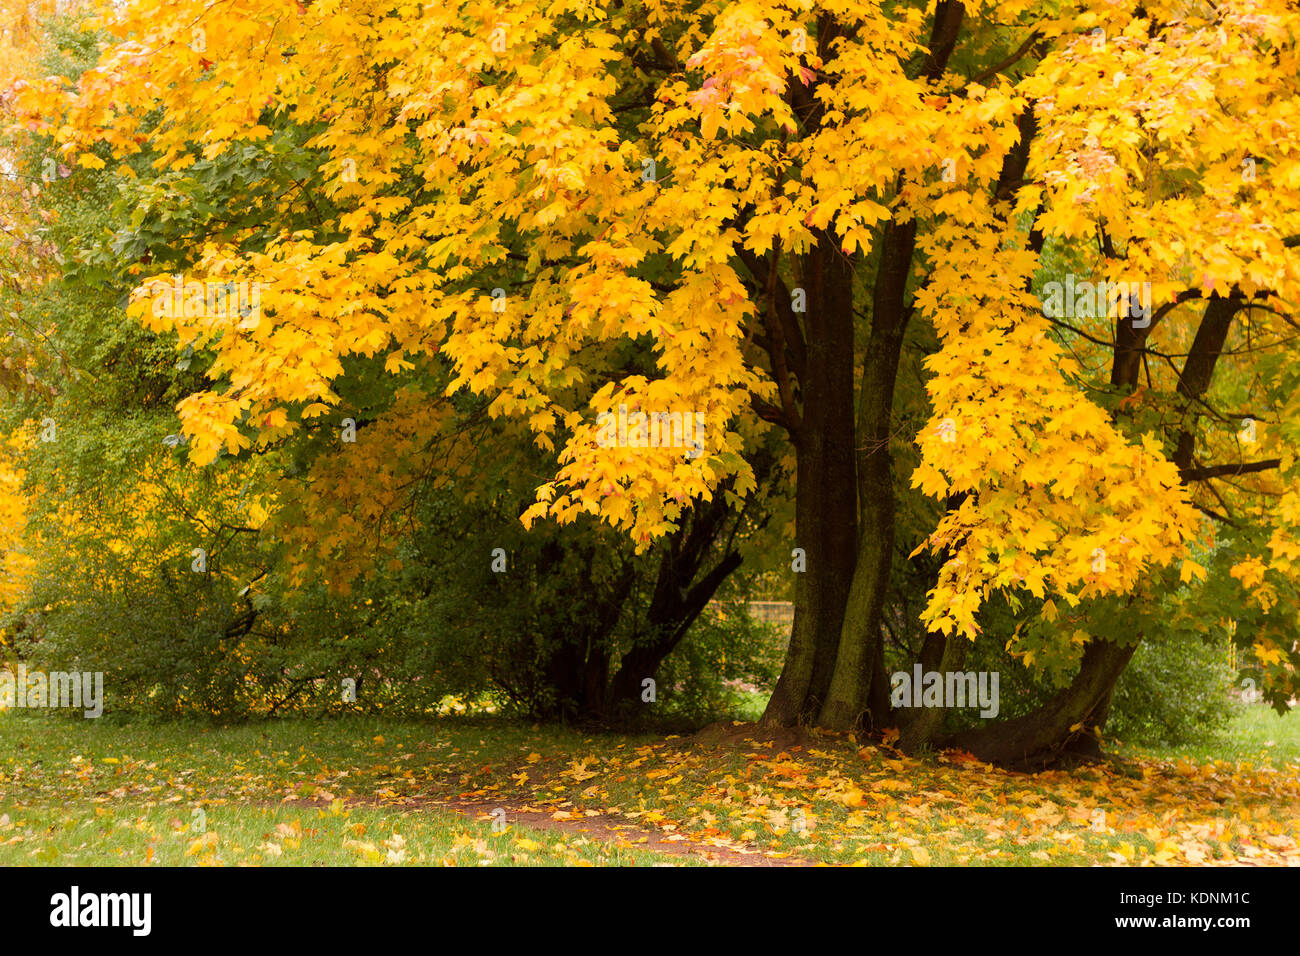 Maple tree in a park by an autumn day with yellow leaves and grass around covered by foliage. Stock Photo